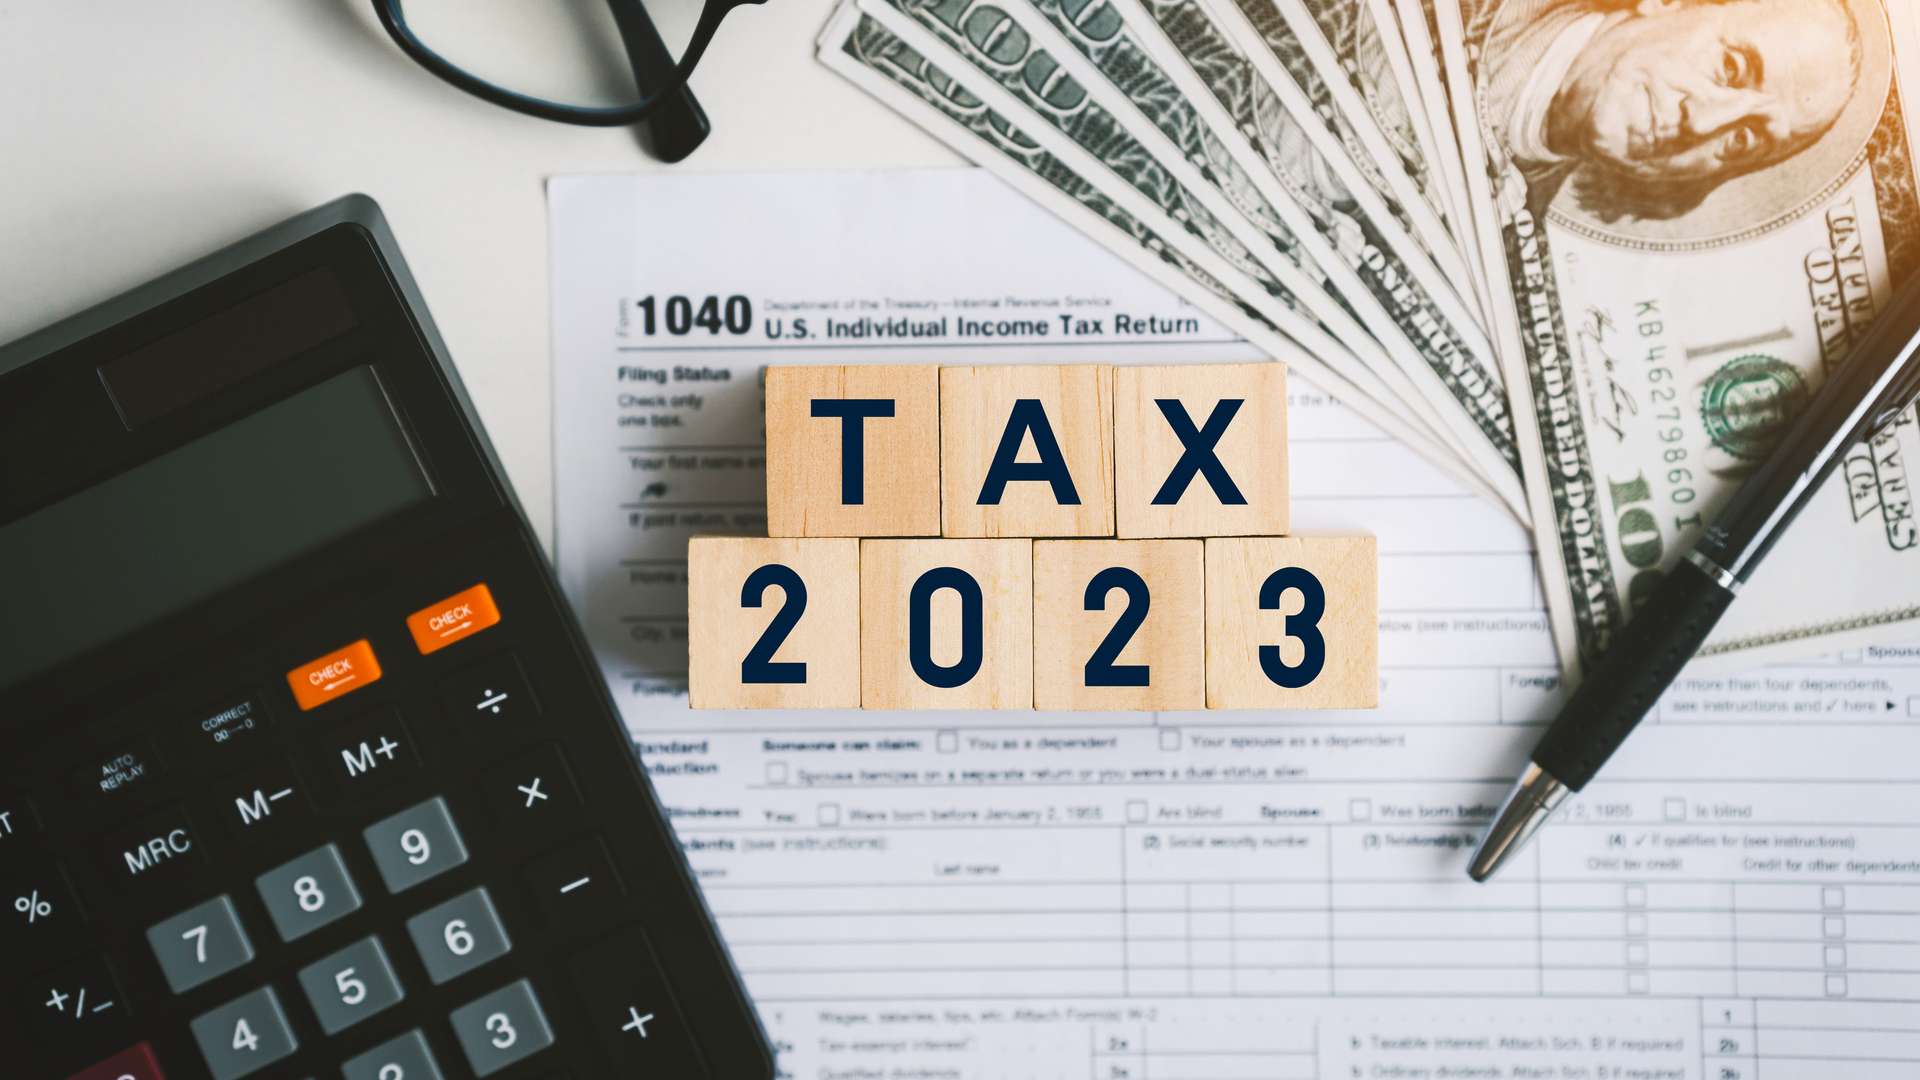 <p>An audit is fairly unlikely, but you'll need prior-year returns if you need to file an amended return or claim a missed refund -- and having them on hand can make it easier to complete this year's taxes, too.</p> <p>"Check your prior year's tax filings for reference," said Johan Garcia, CPA, owner and sole author of <a href="https://aftertaxcash.com/" rel="noreferrer noopener">After Tax Cash</a> and principal of JG CPA & Advisory. "However, this might change, as you could have income from different sources and deductions, too."</p>